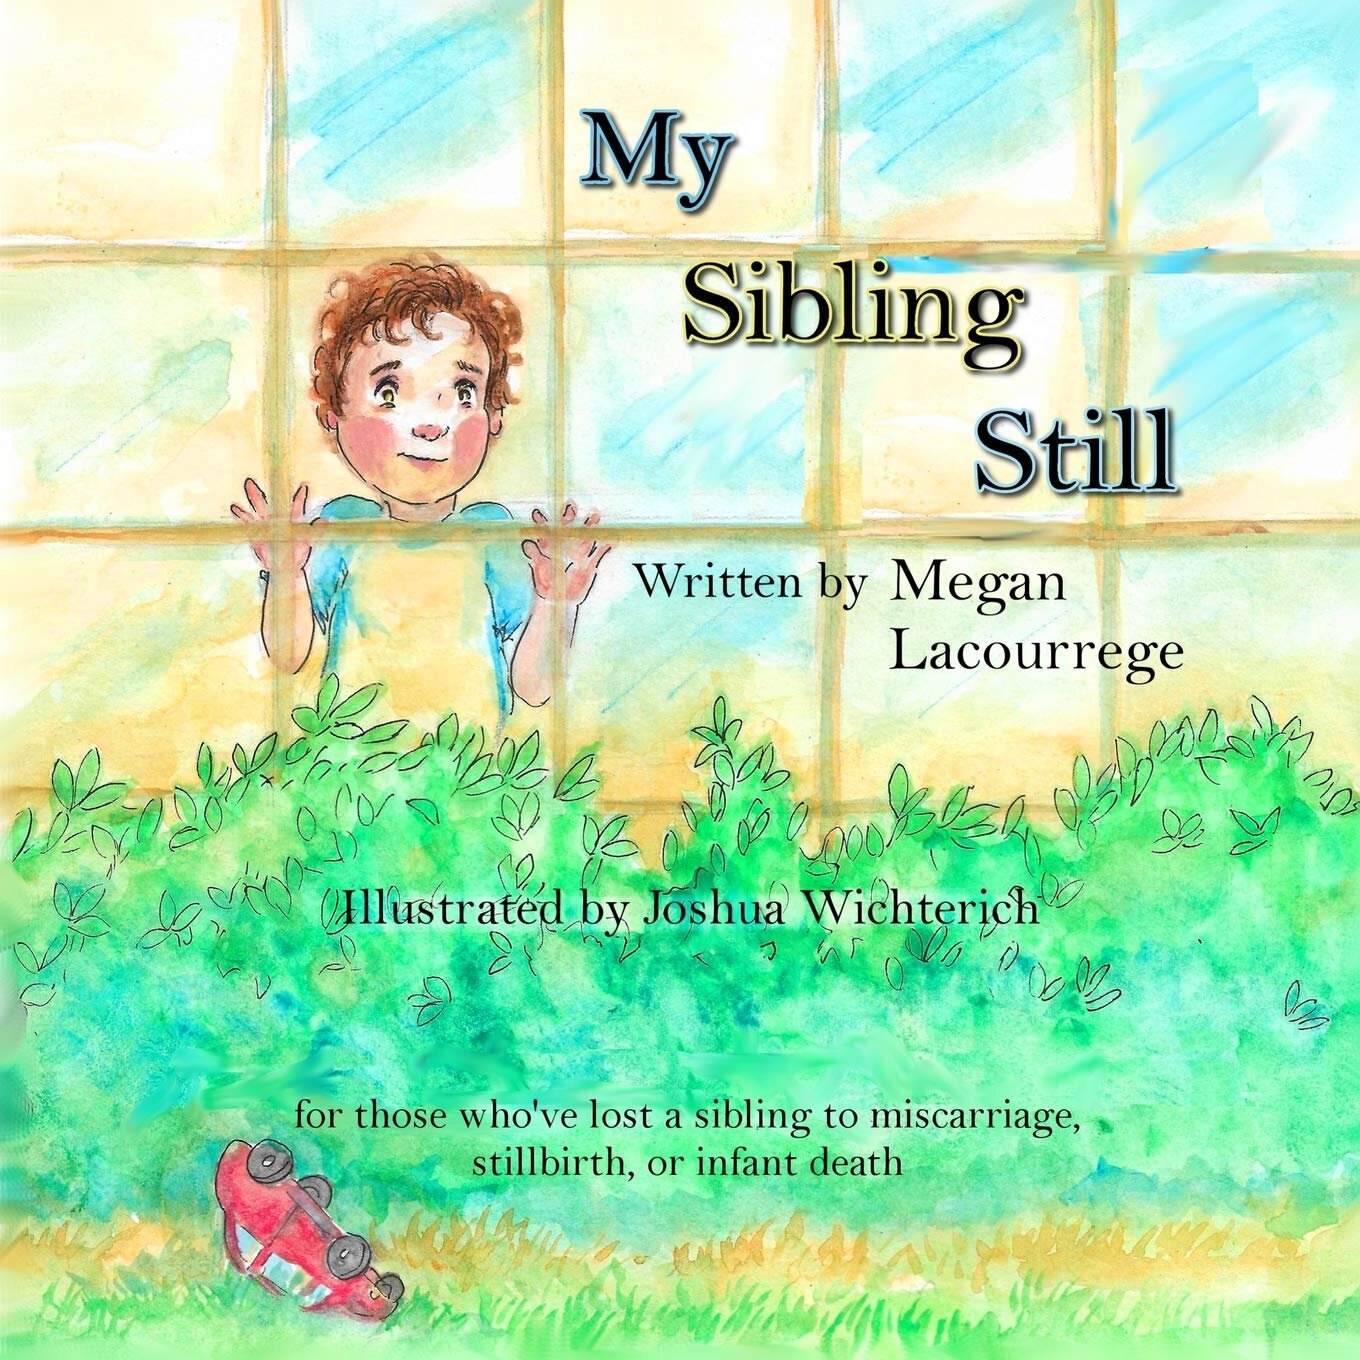 My Sibling Still: for those who've lost a sibling to miscarriage, stillbirth, and infant death (Copy) (Copy)